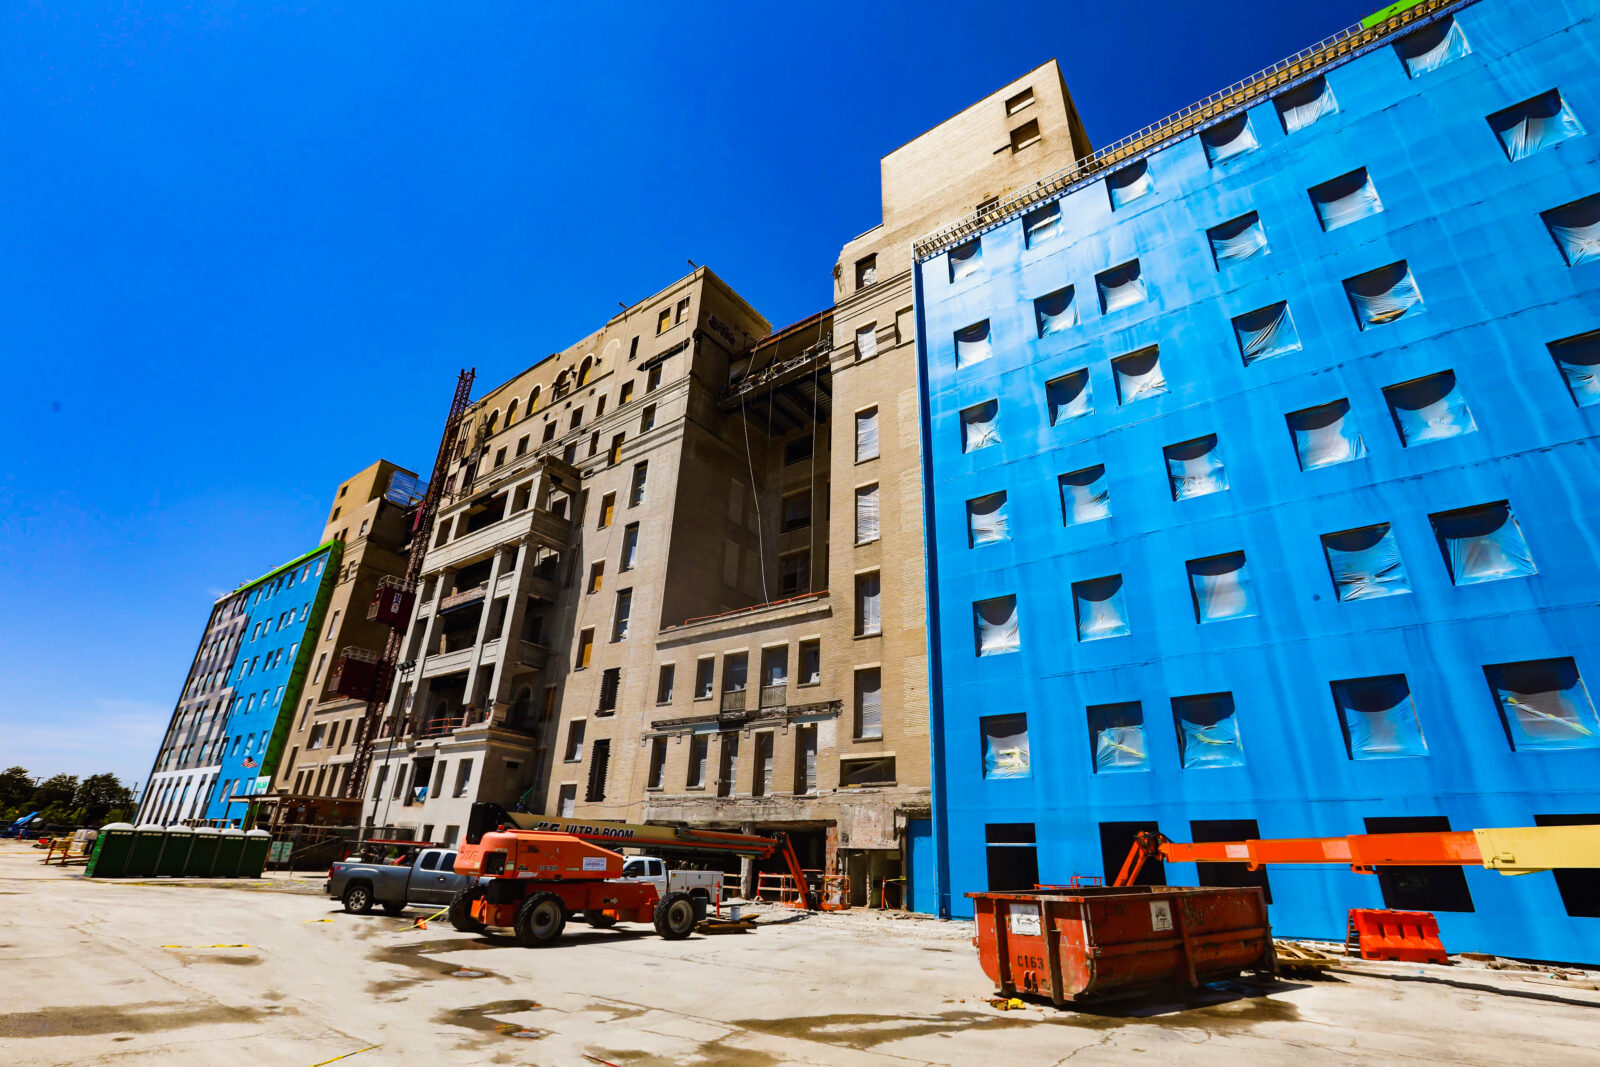 Hyatt house in Chicago during construction with blue wall coverings